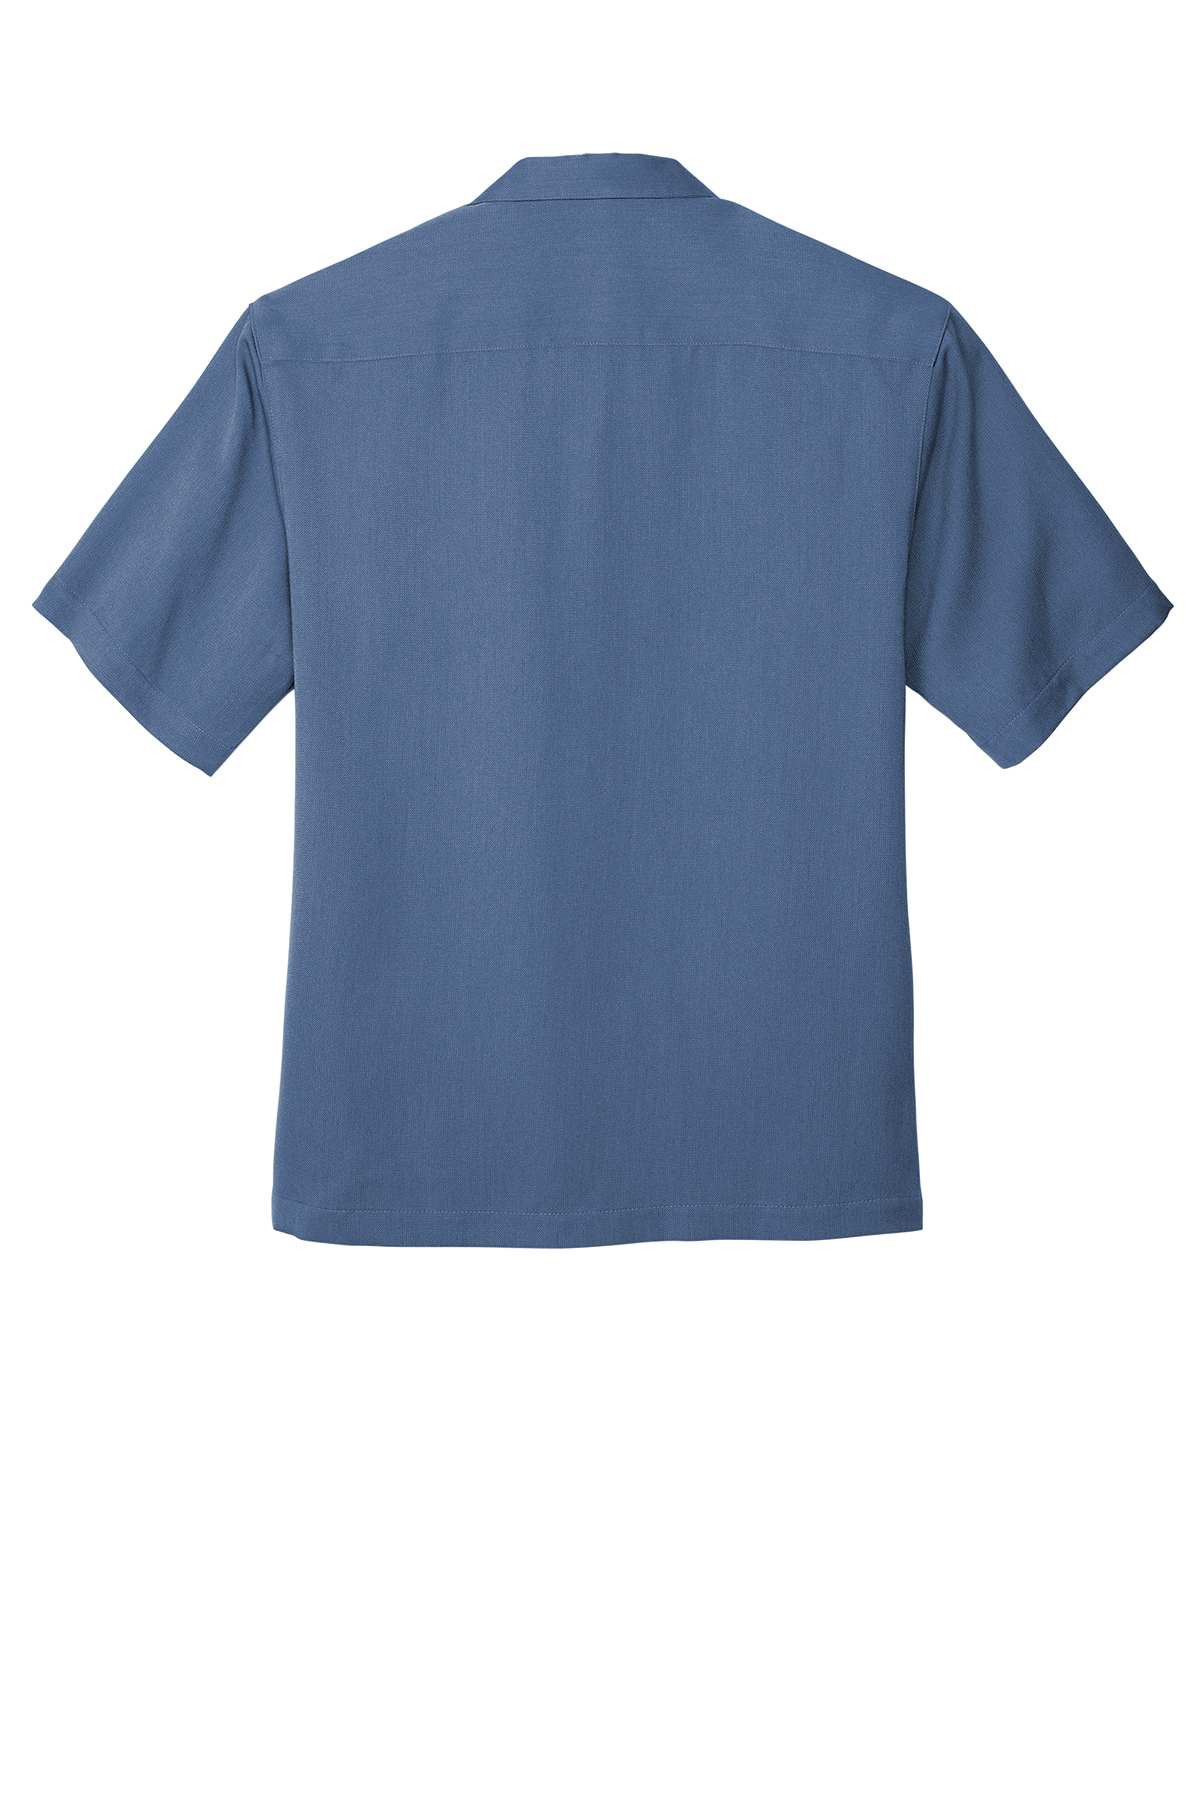 Port Authority Easy Care Camp Shirt, Product